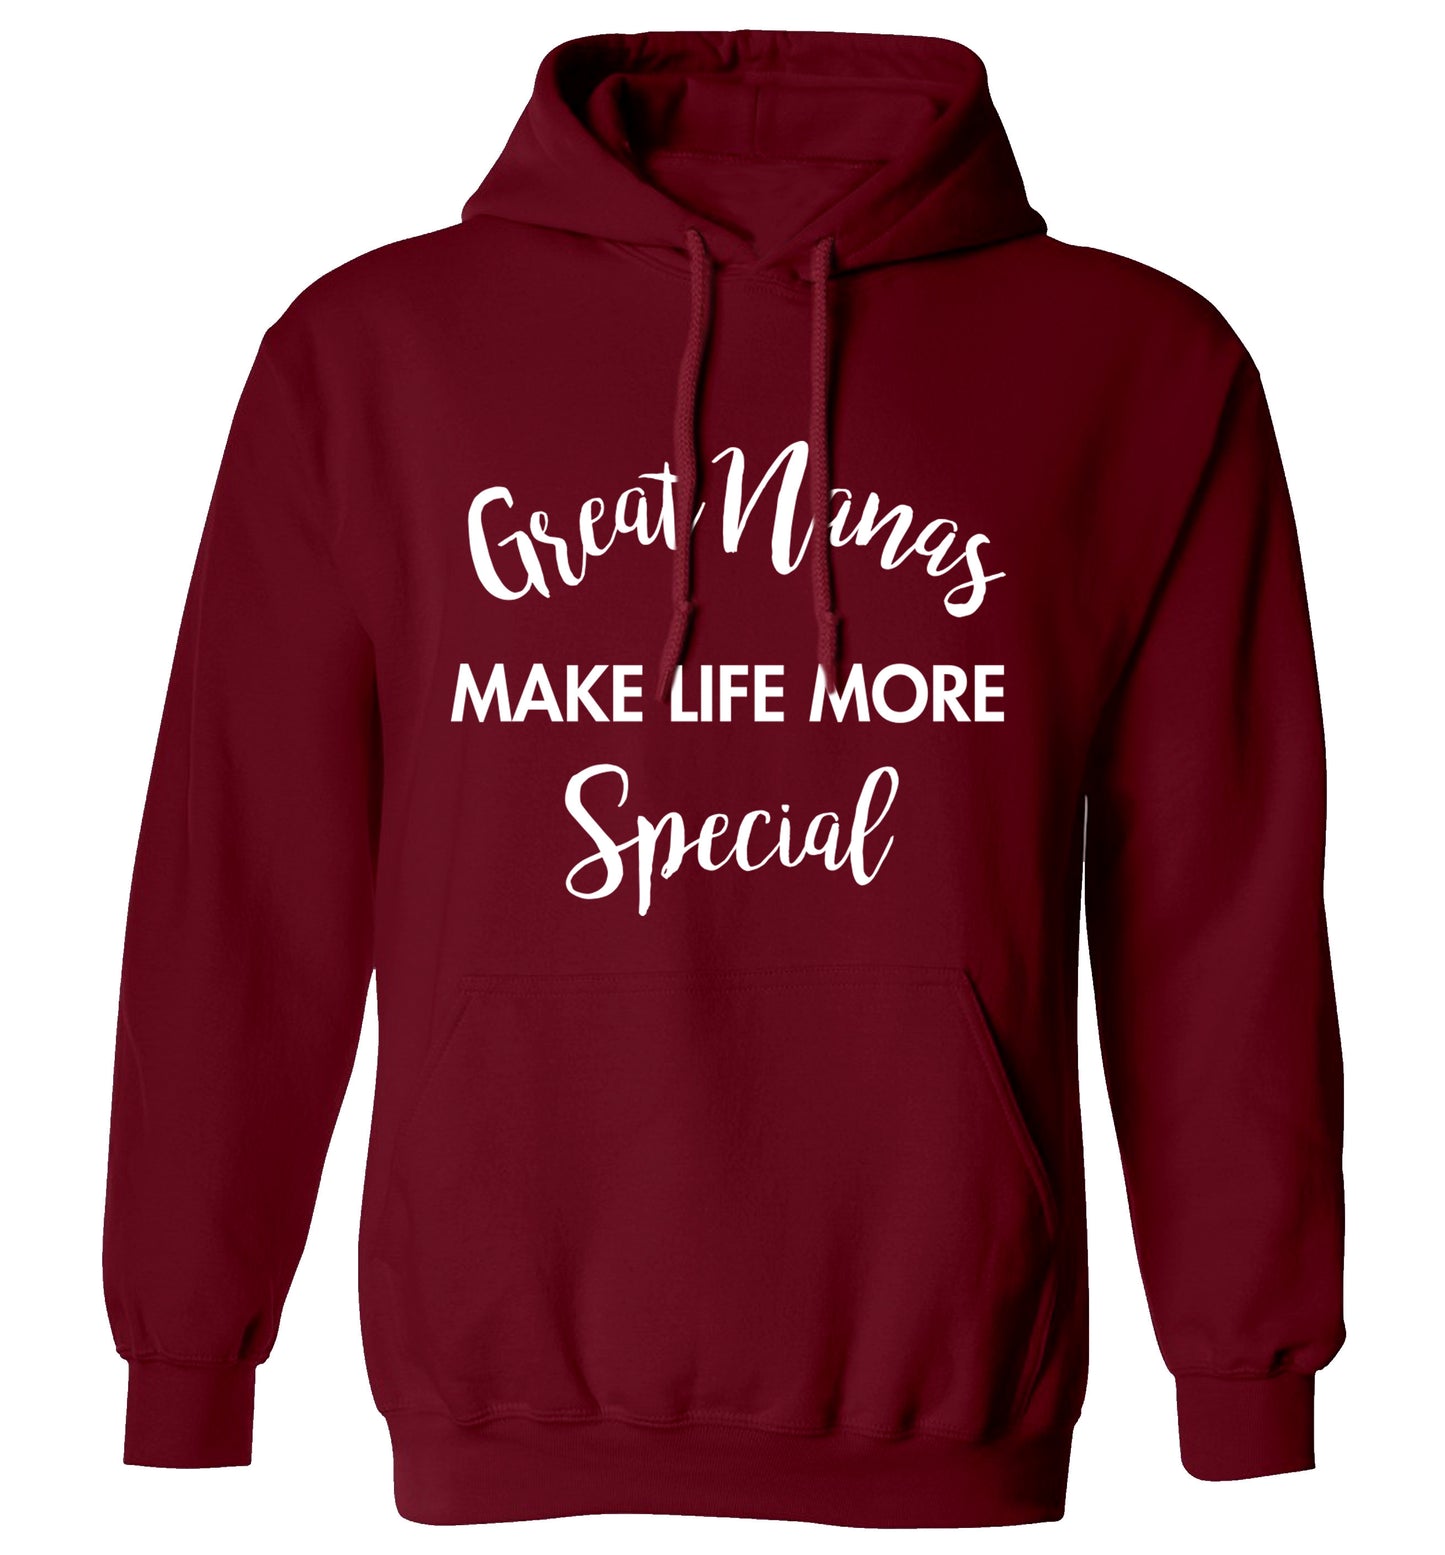 Great nanas make life more special adults unisex maroon hoodie 2XL